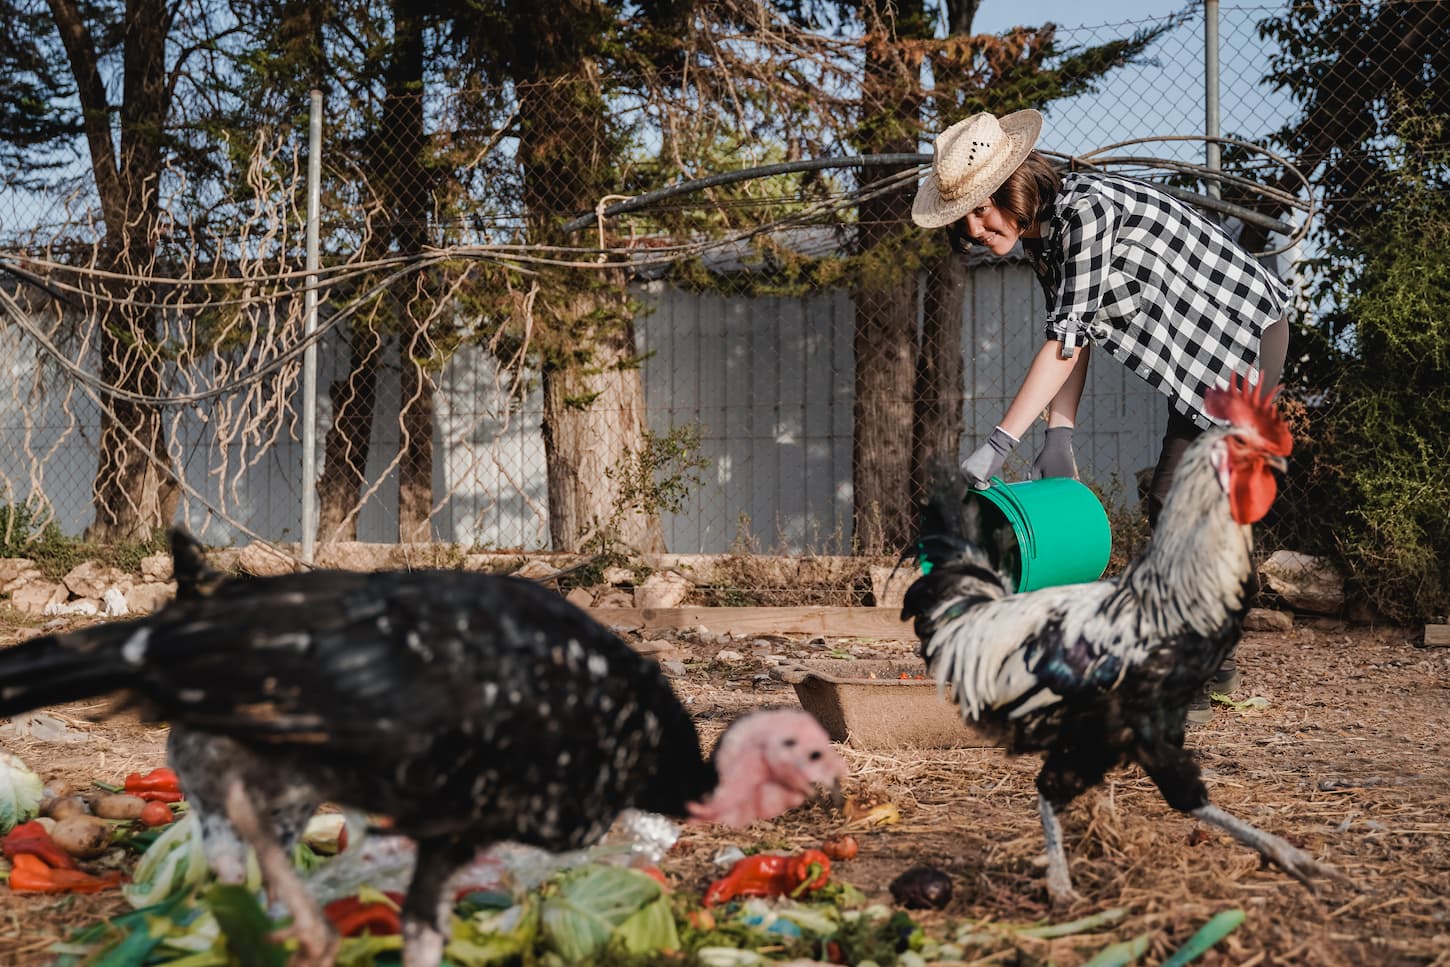 An image of a farmer woman feeding chickens with organic food inside a henhouse at a coop farm.